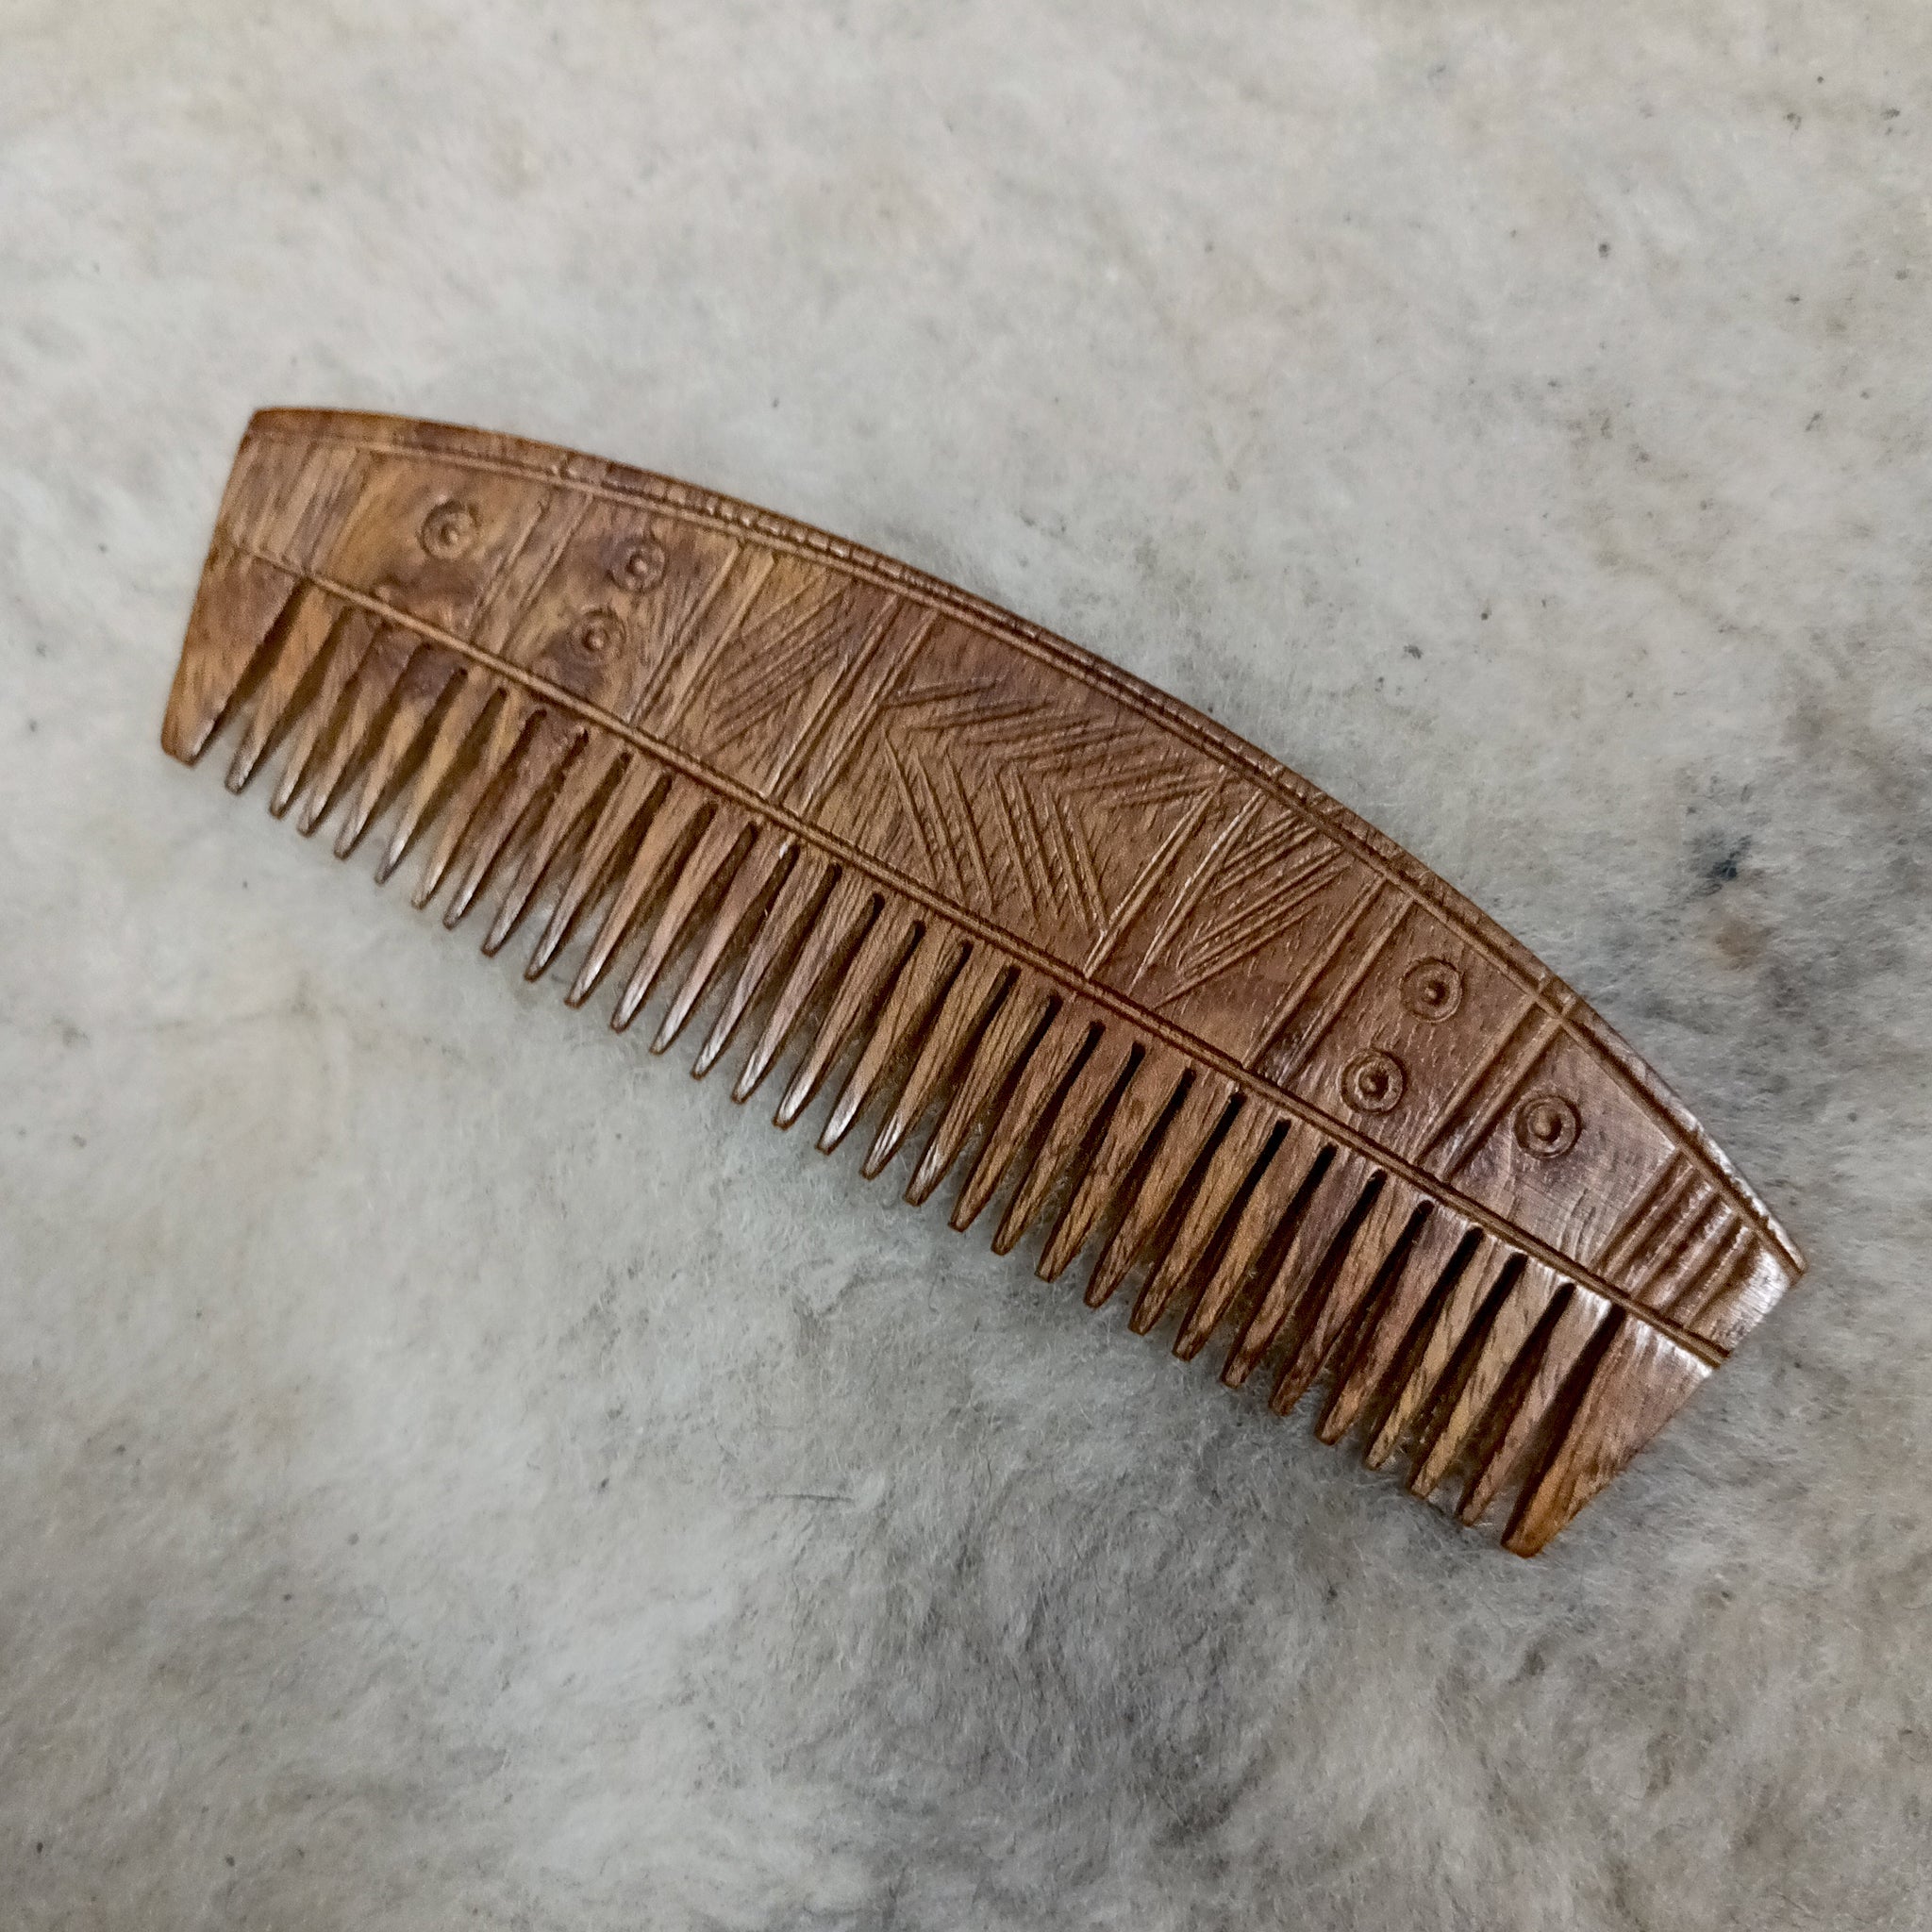 Decorated Wood Viking Comb with Curved Back on Wool